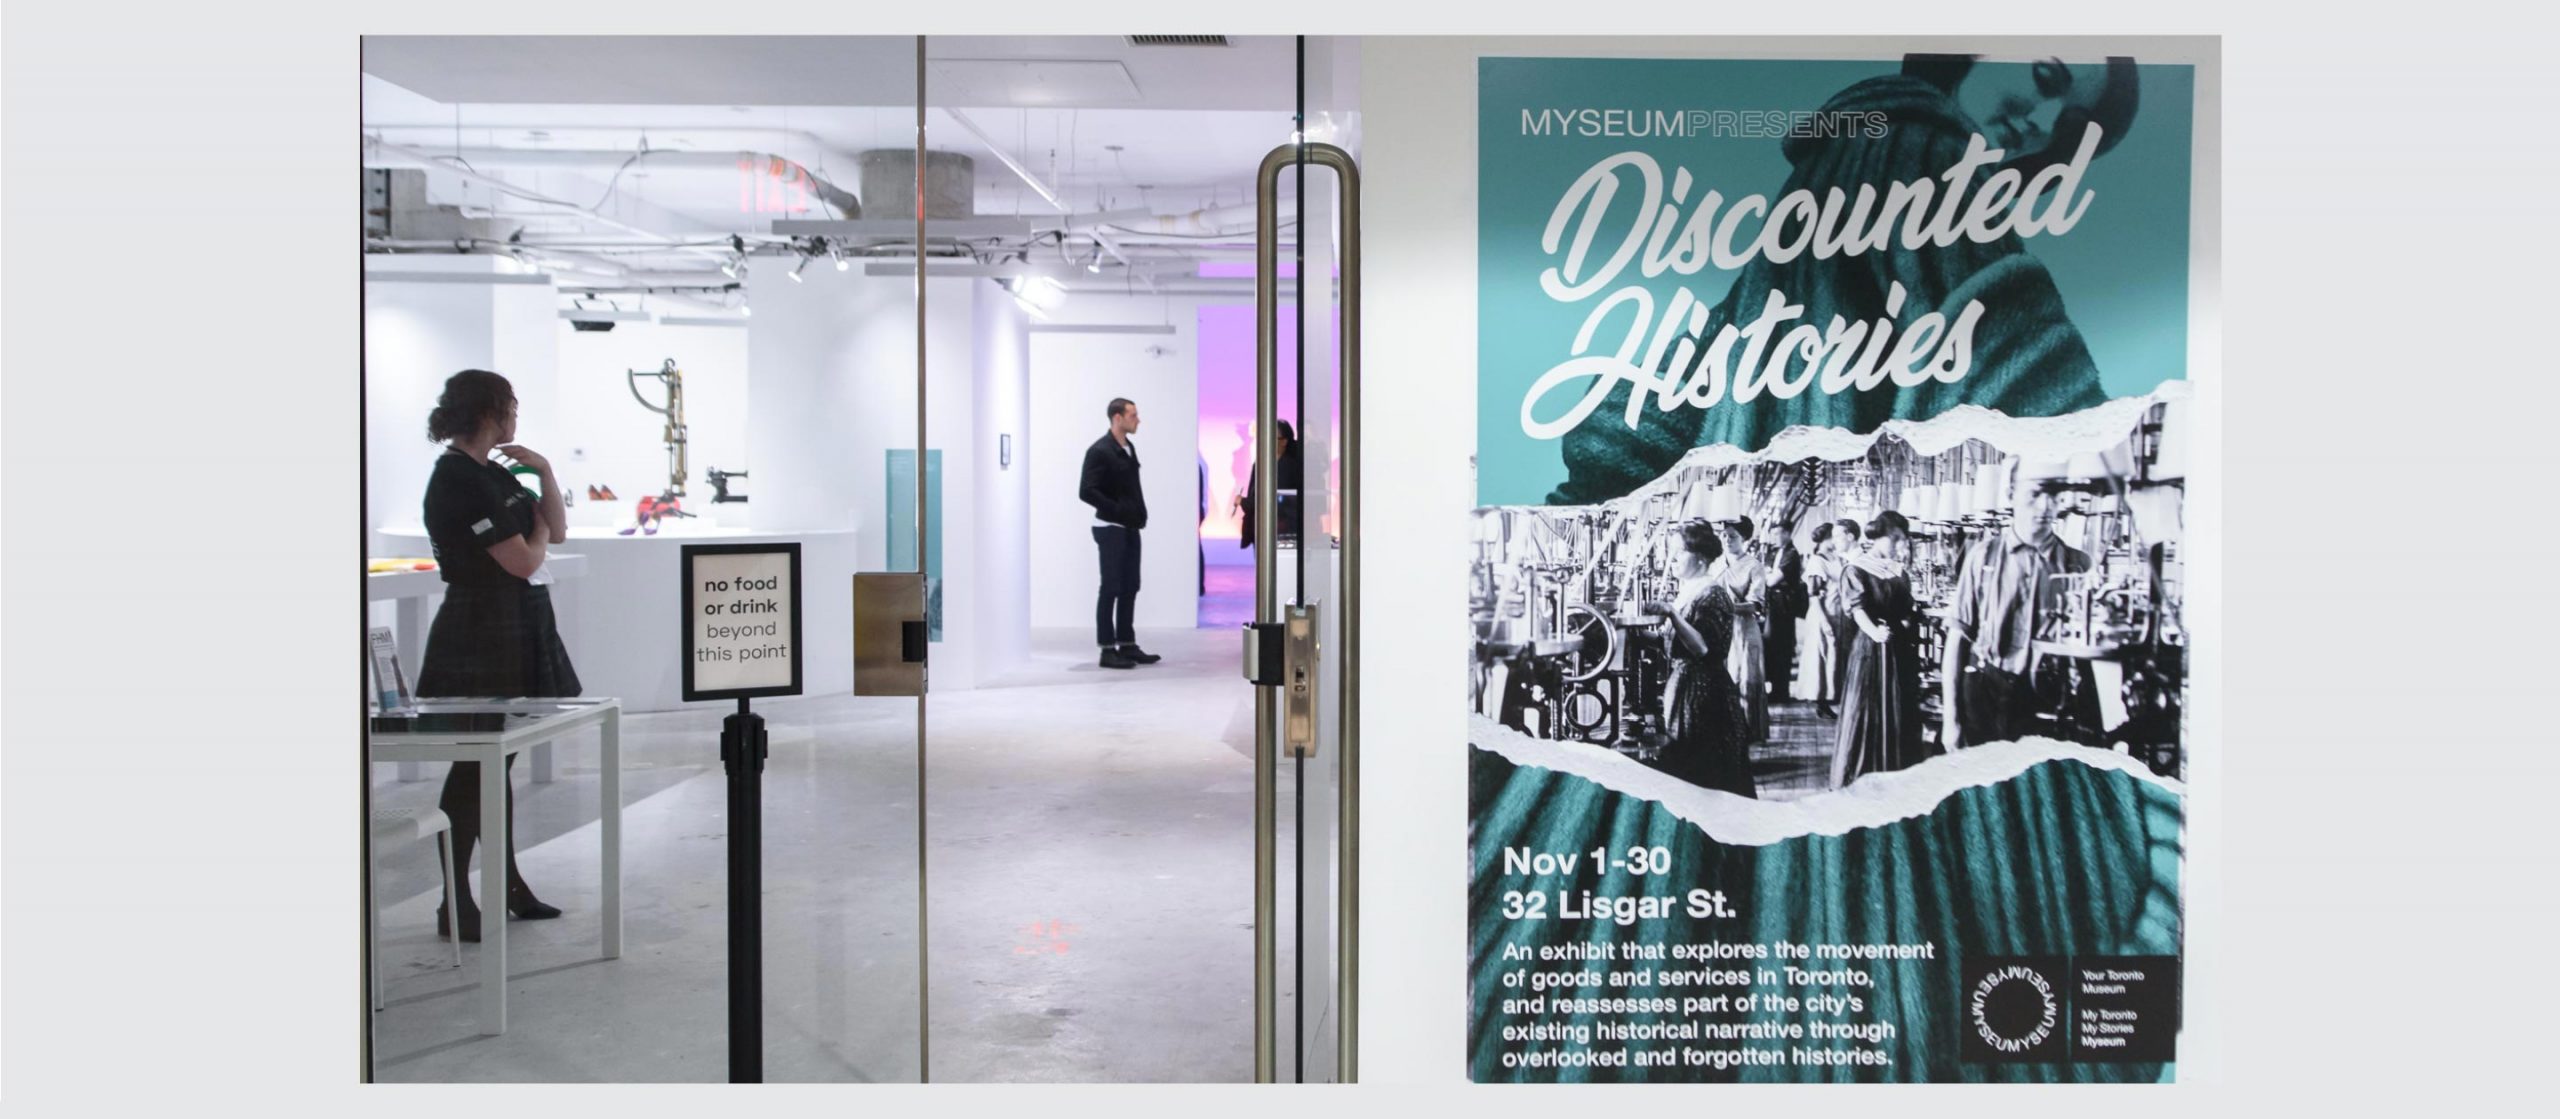 The Discounted Histories exhibit entrance is shown alongside the program cover featuring the identity.